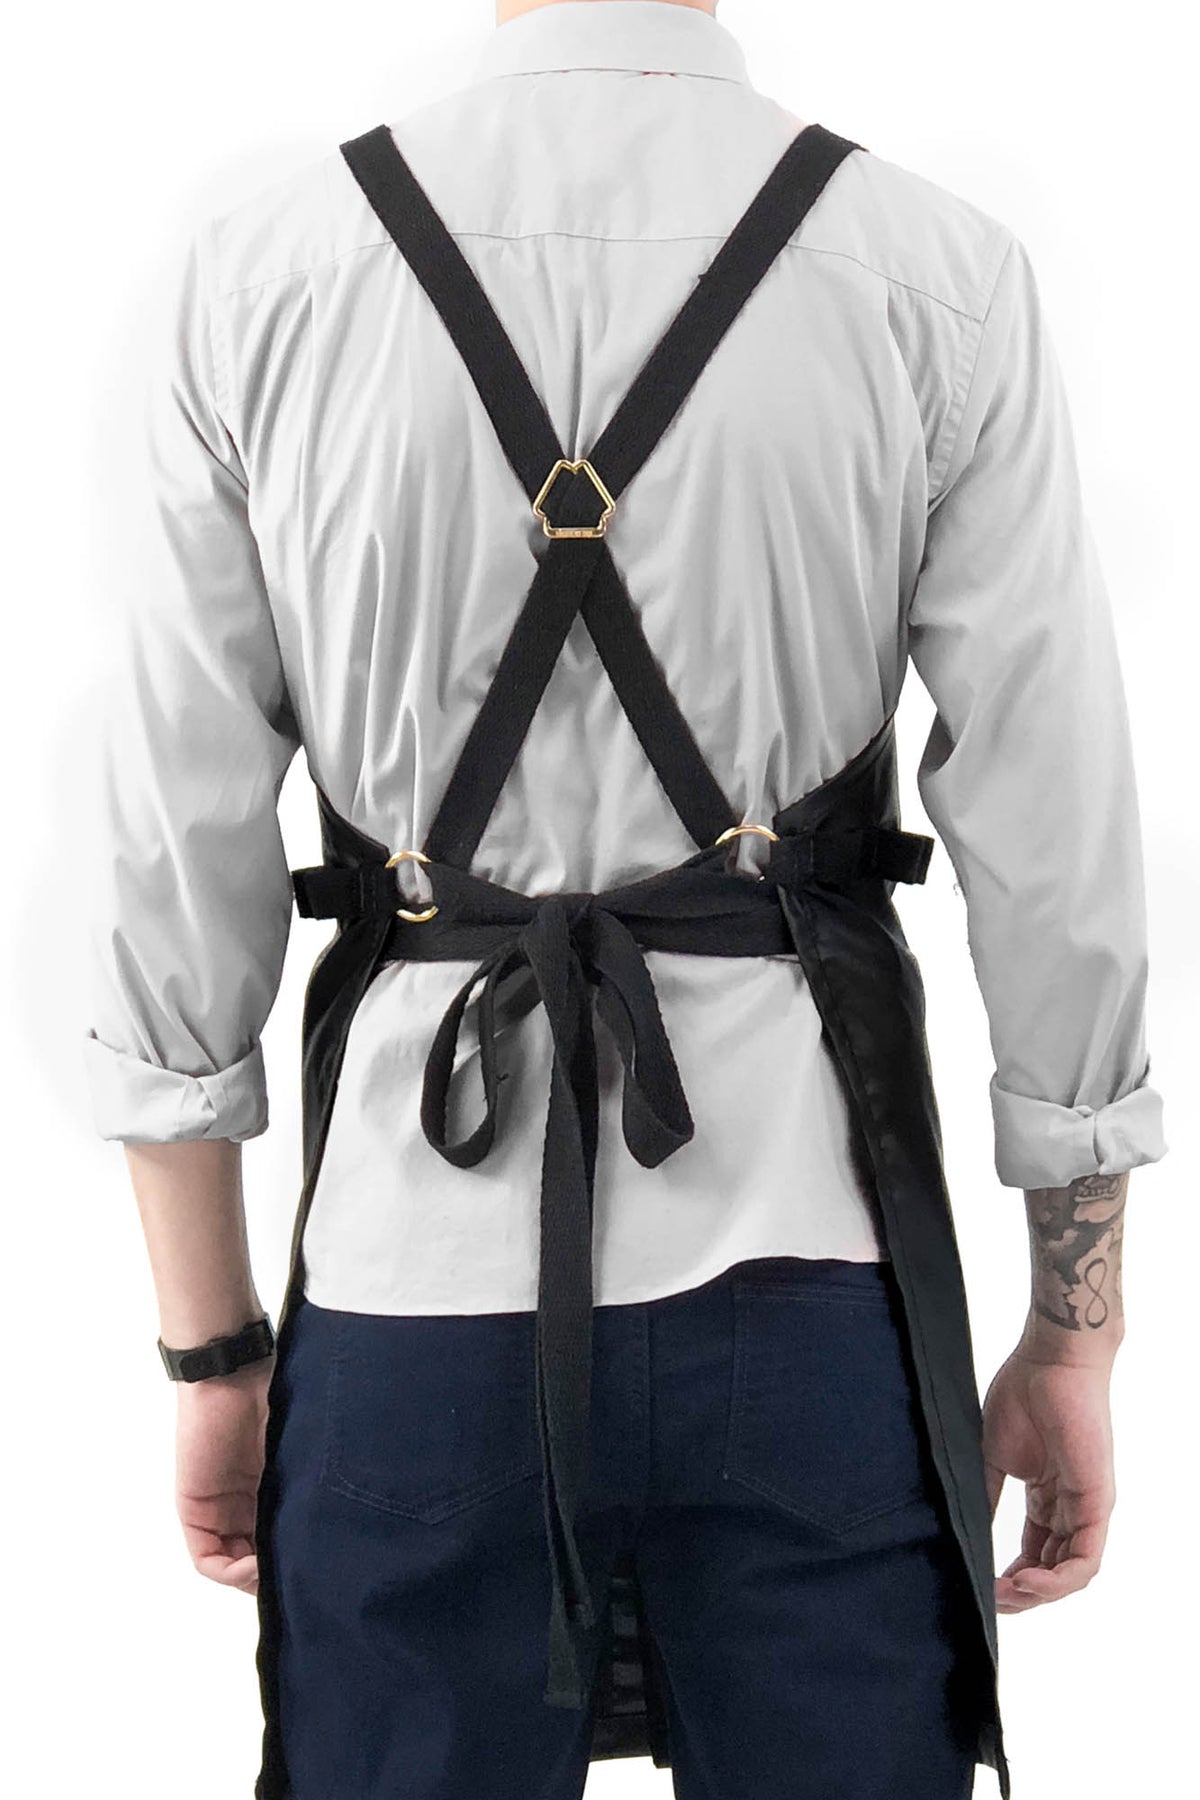 Barber Apron - CrossBack, Water Resistant Coated Fabric, Split-Leg - Salon, Hairstylist - Under NY Sky